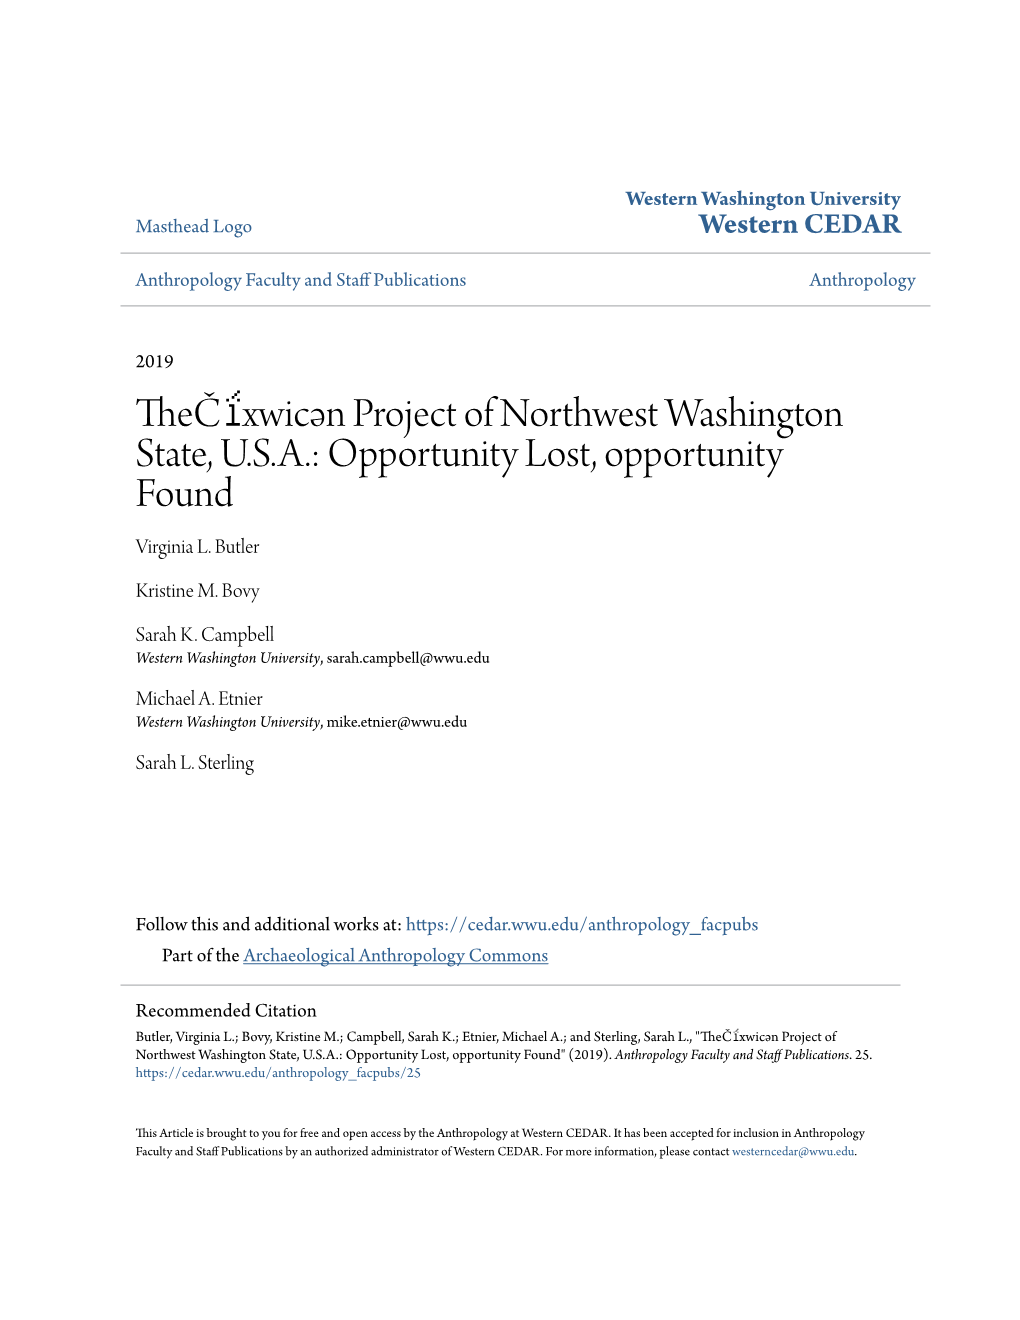 Thečḯxwicən Project of Northwest Washington State, U.S.A.: Opportunity Lost, Opportunity Found Virginia L